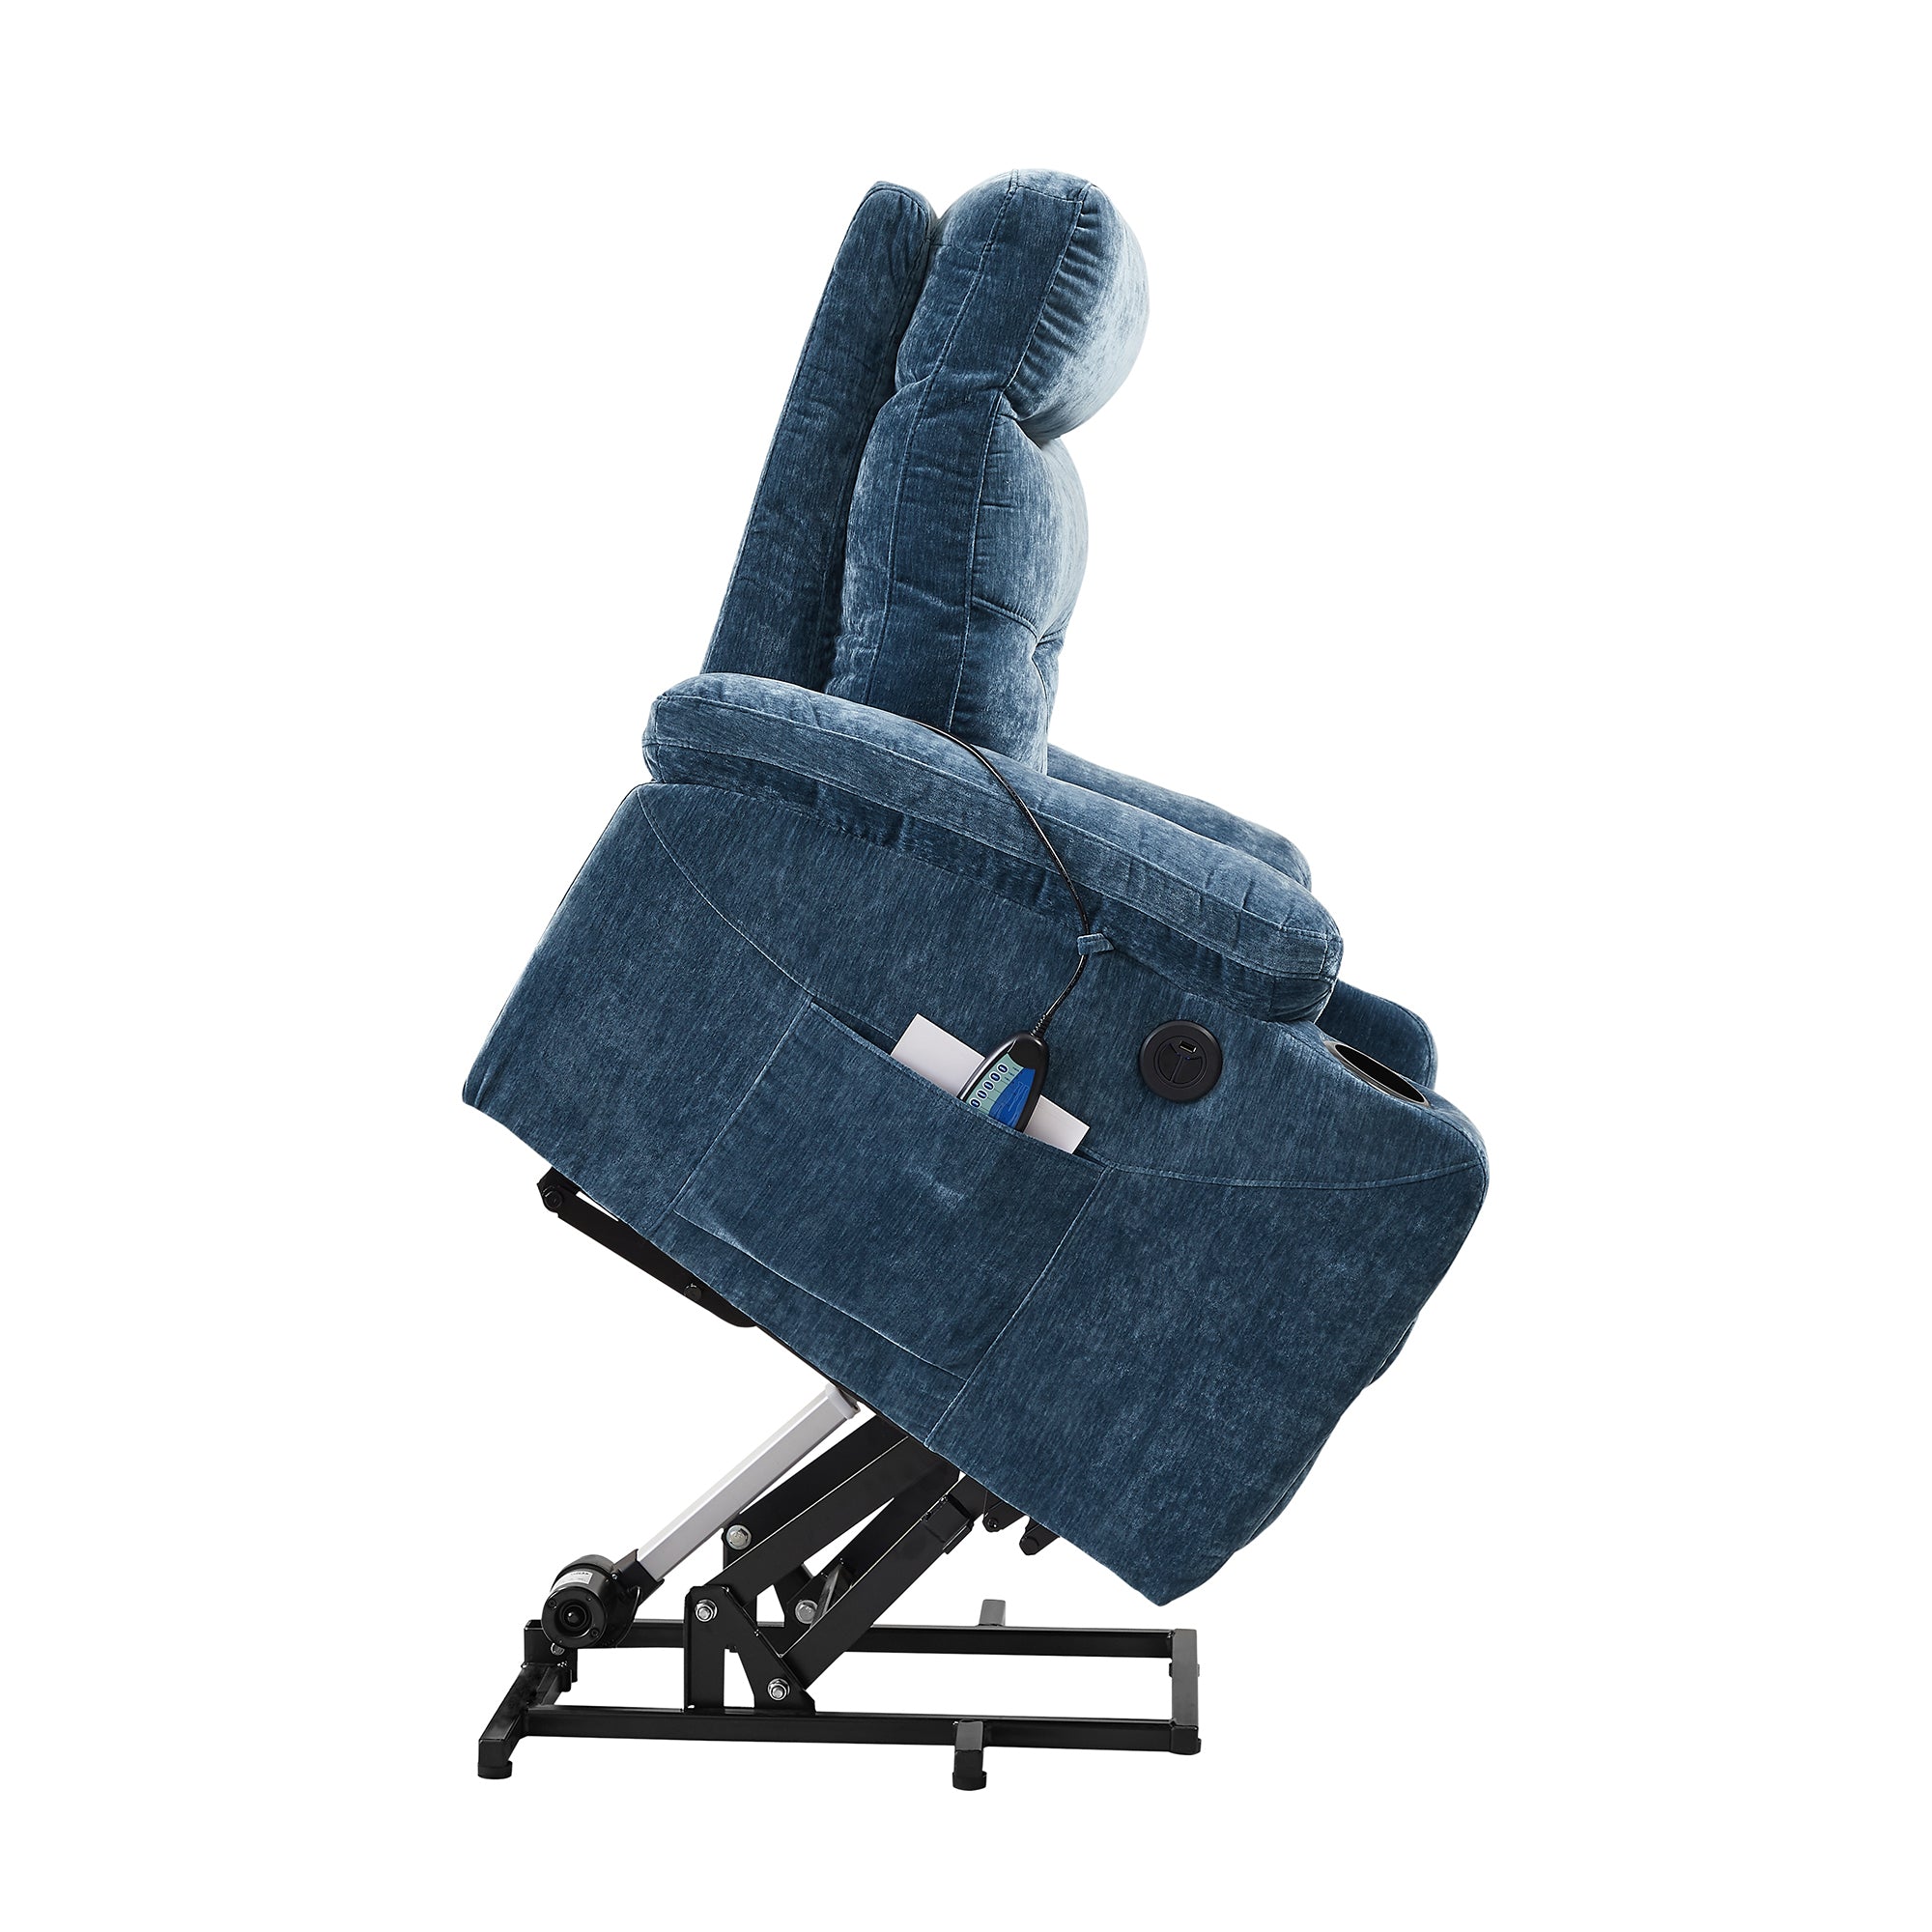 Blue Power Lift Chair Right Profile with Lift Extended